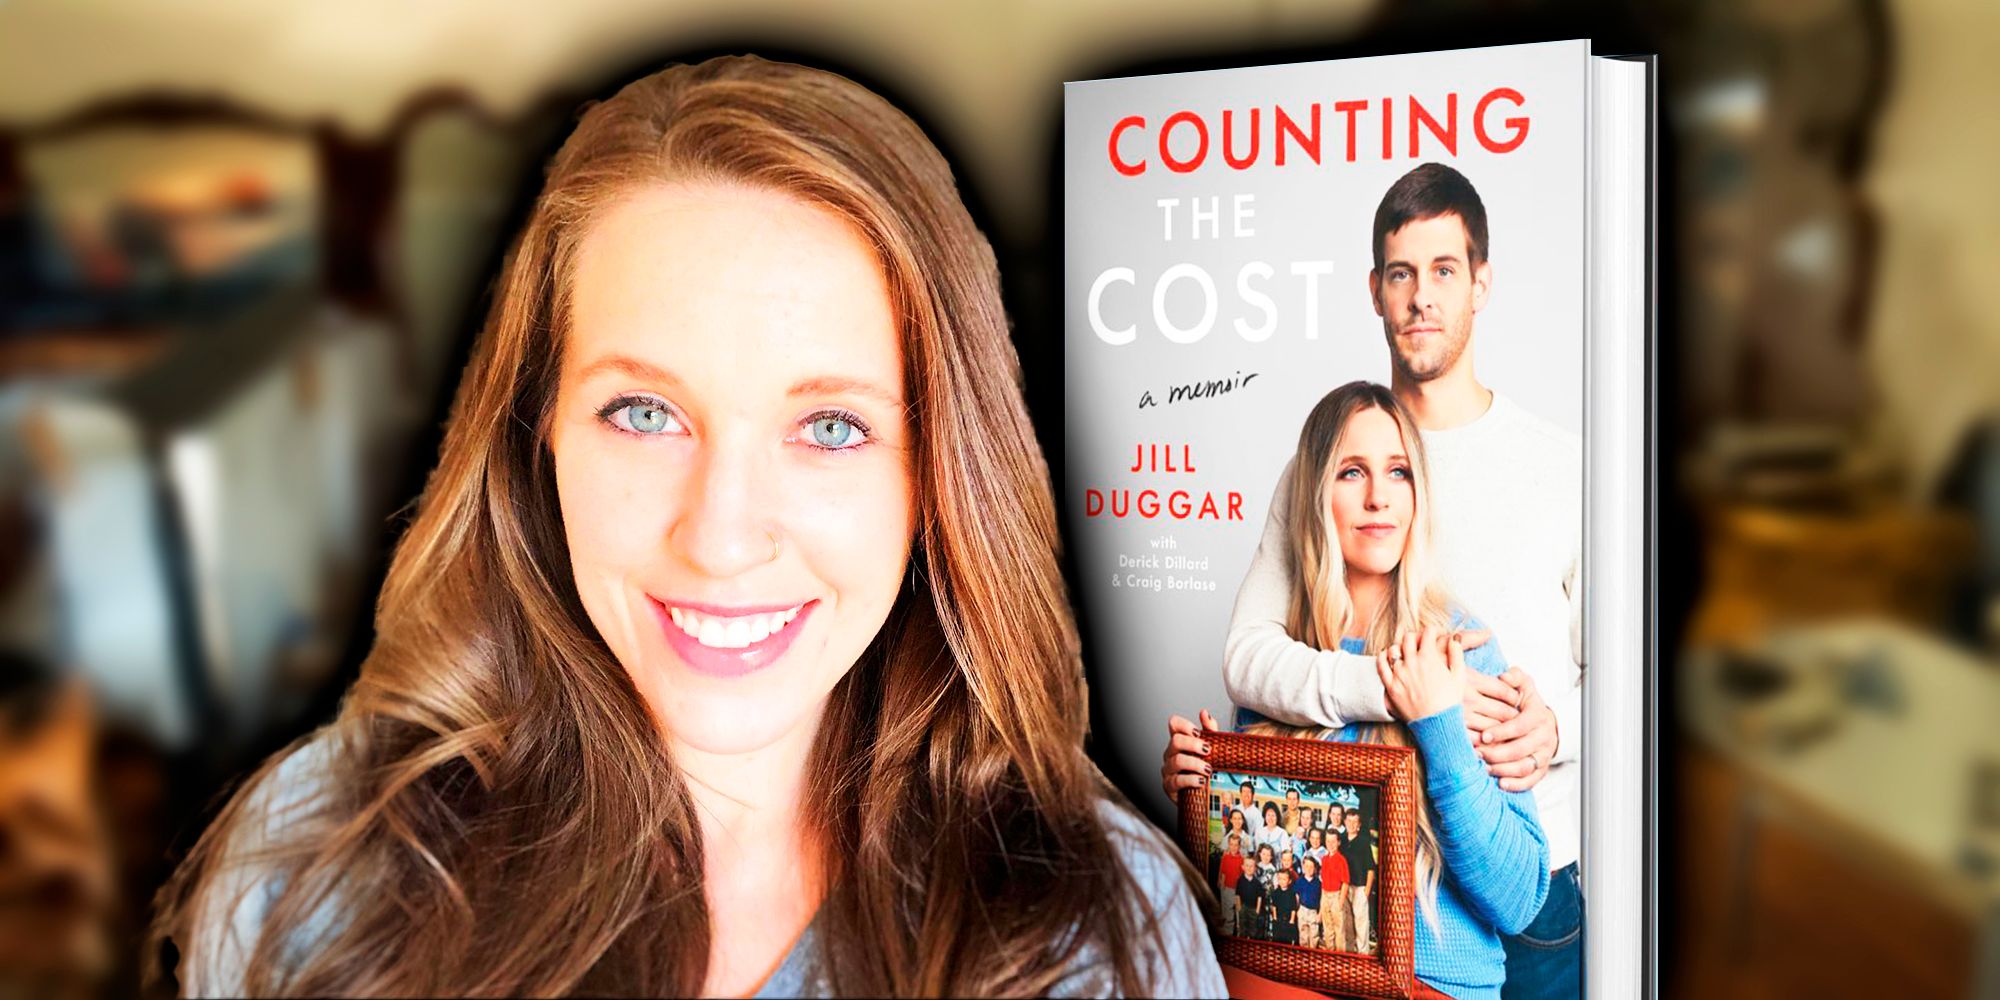 19 Kids and Counting's Jill Duggar with her book Counting the Cost